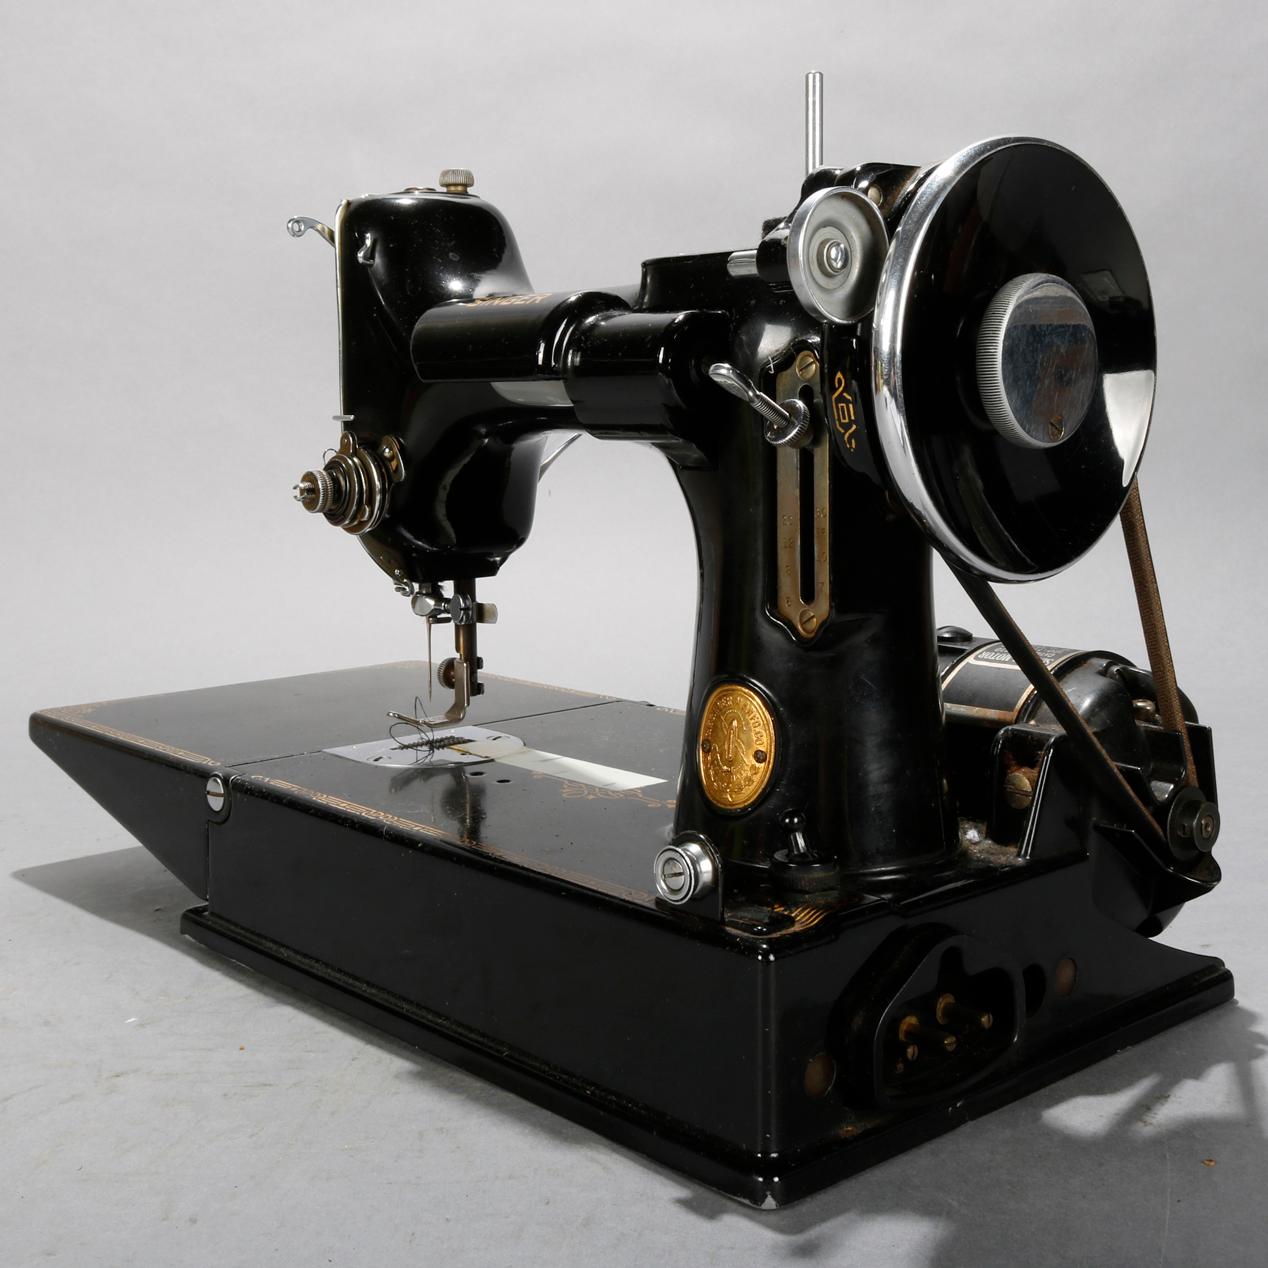 American Antique Singer Featherweight Sewing Machine and Case, circa 1920